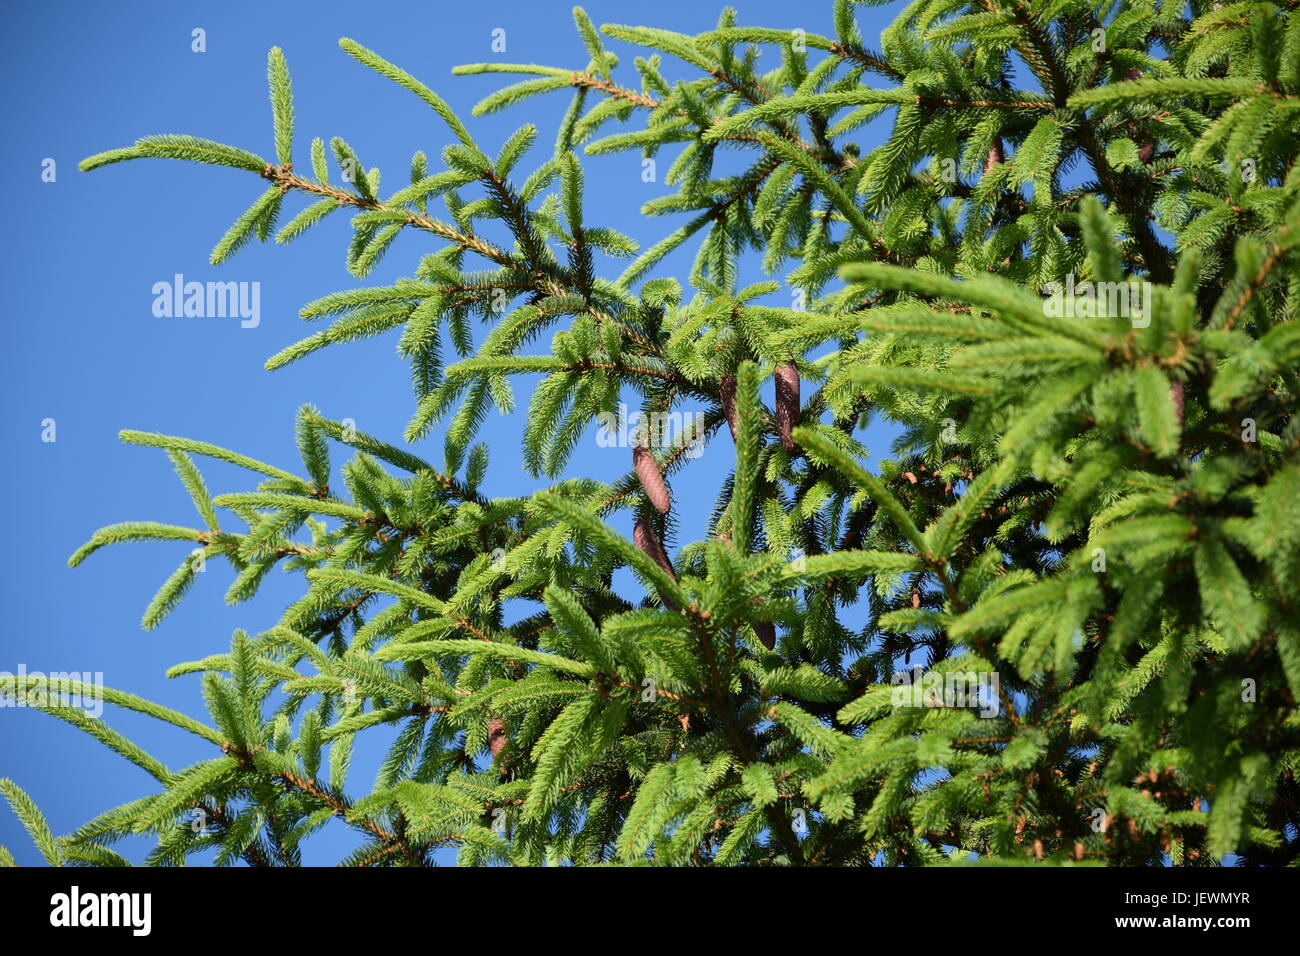 Fresh Norway Spruce or Picea abies with cones in closeup Stock Photo